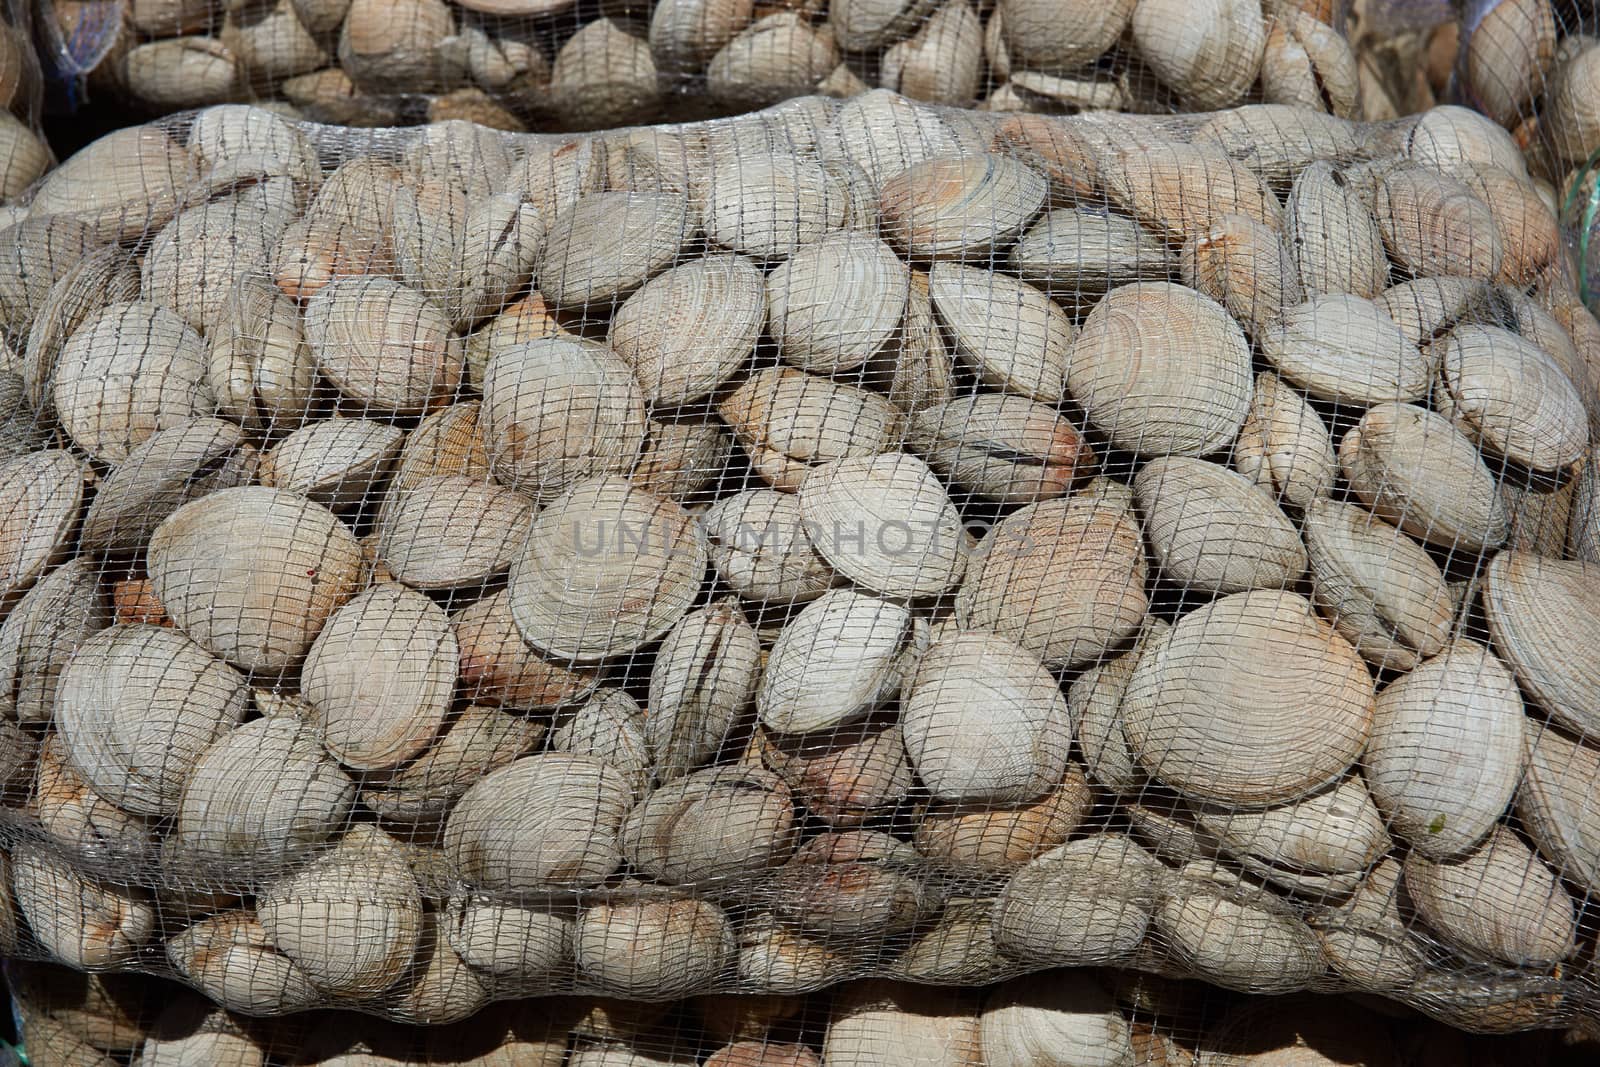 Littleneck Clams (Ameghinomya antiqua) packed in mesh sacks on a jetty at the fishing port of Quellon on the island of Chiloe in Chile.